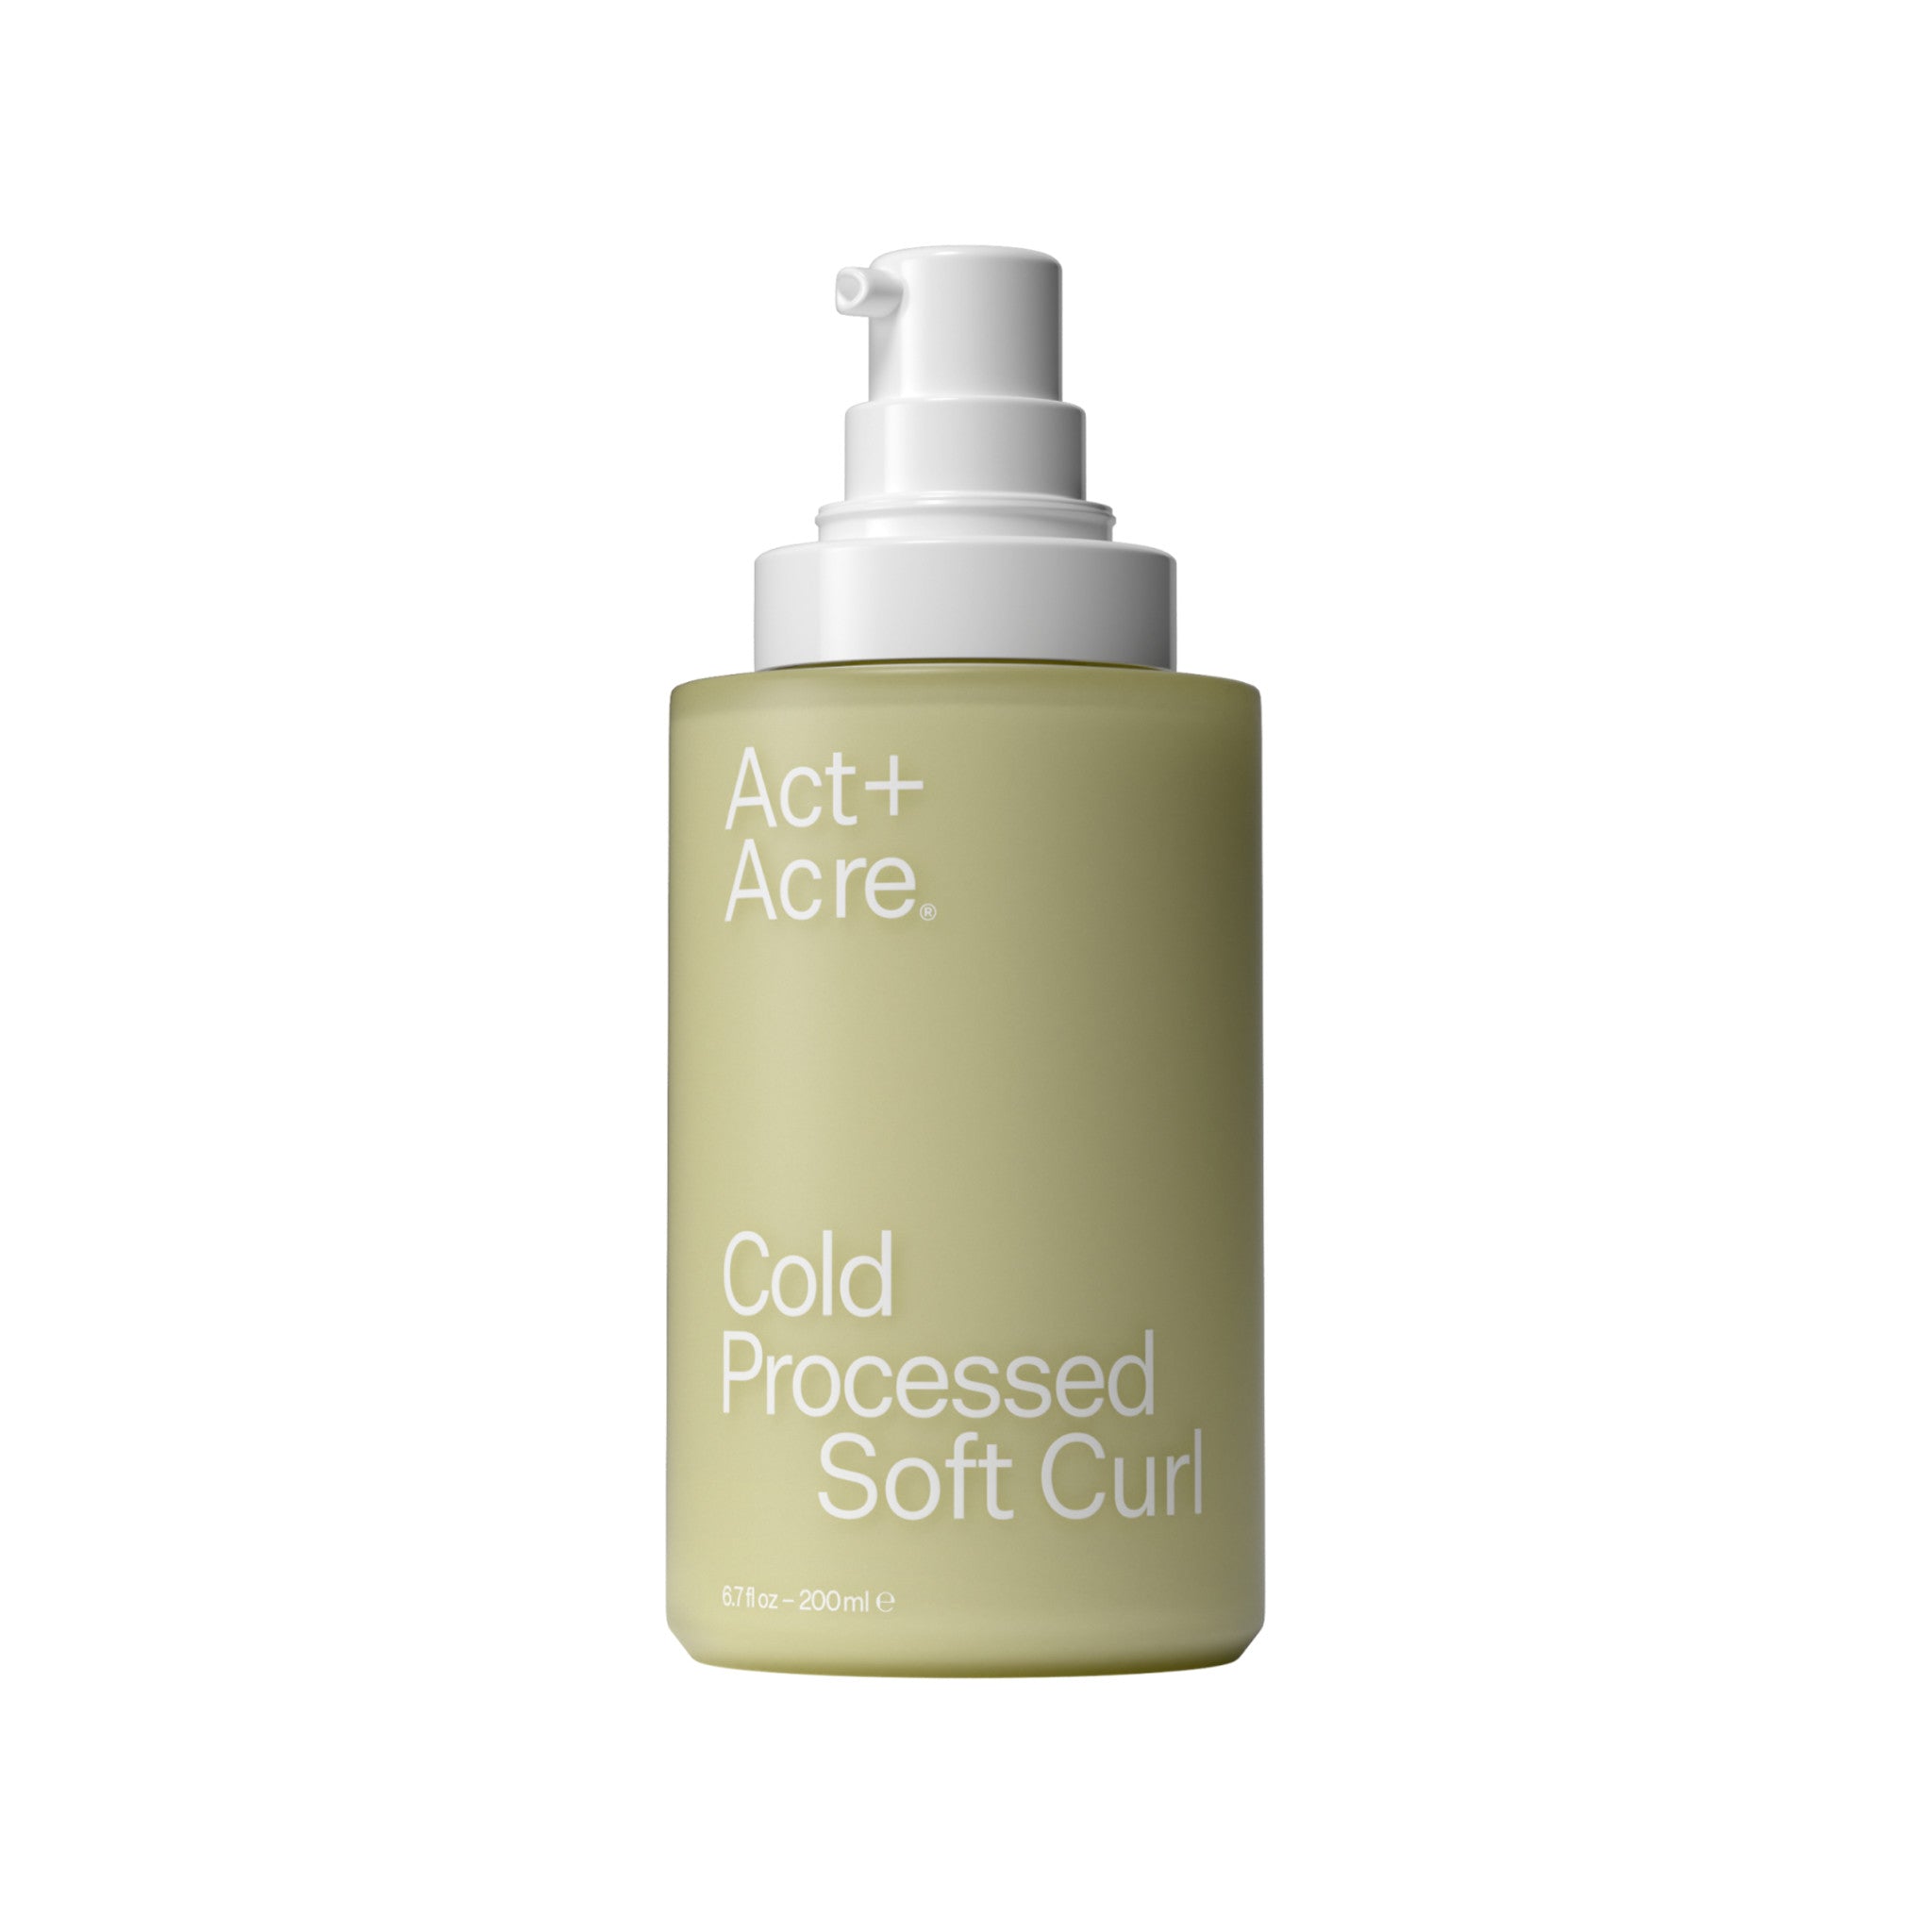 Act+Acre Cold Processed Soft Curl Lotion main image.